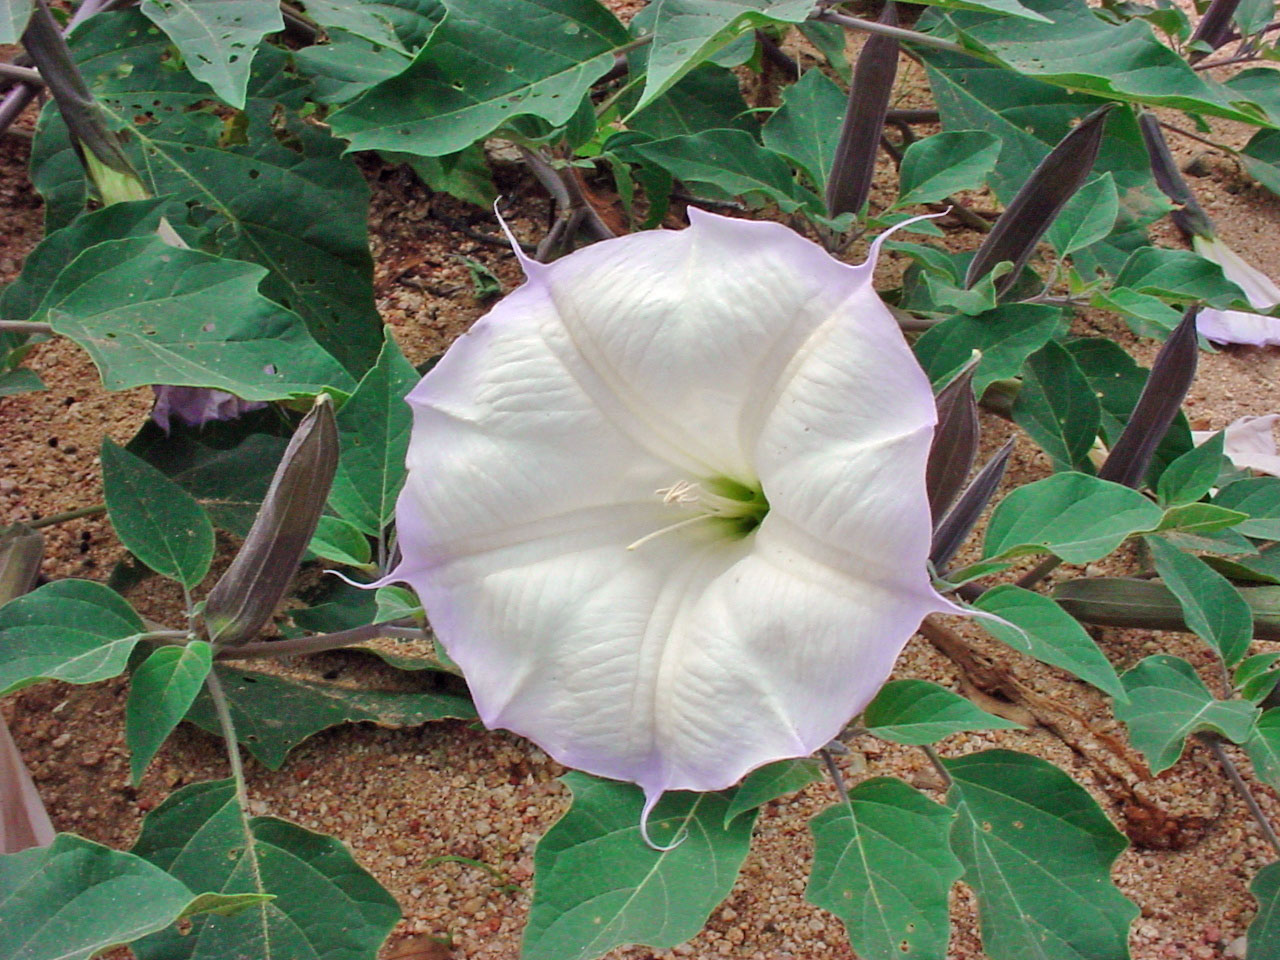 Large white peeled-back bell-shaped flower with prominent stamen, green leaves and reddish sand behind it.